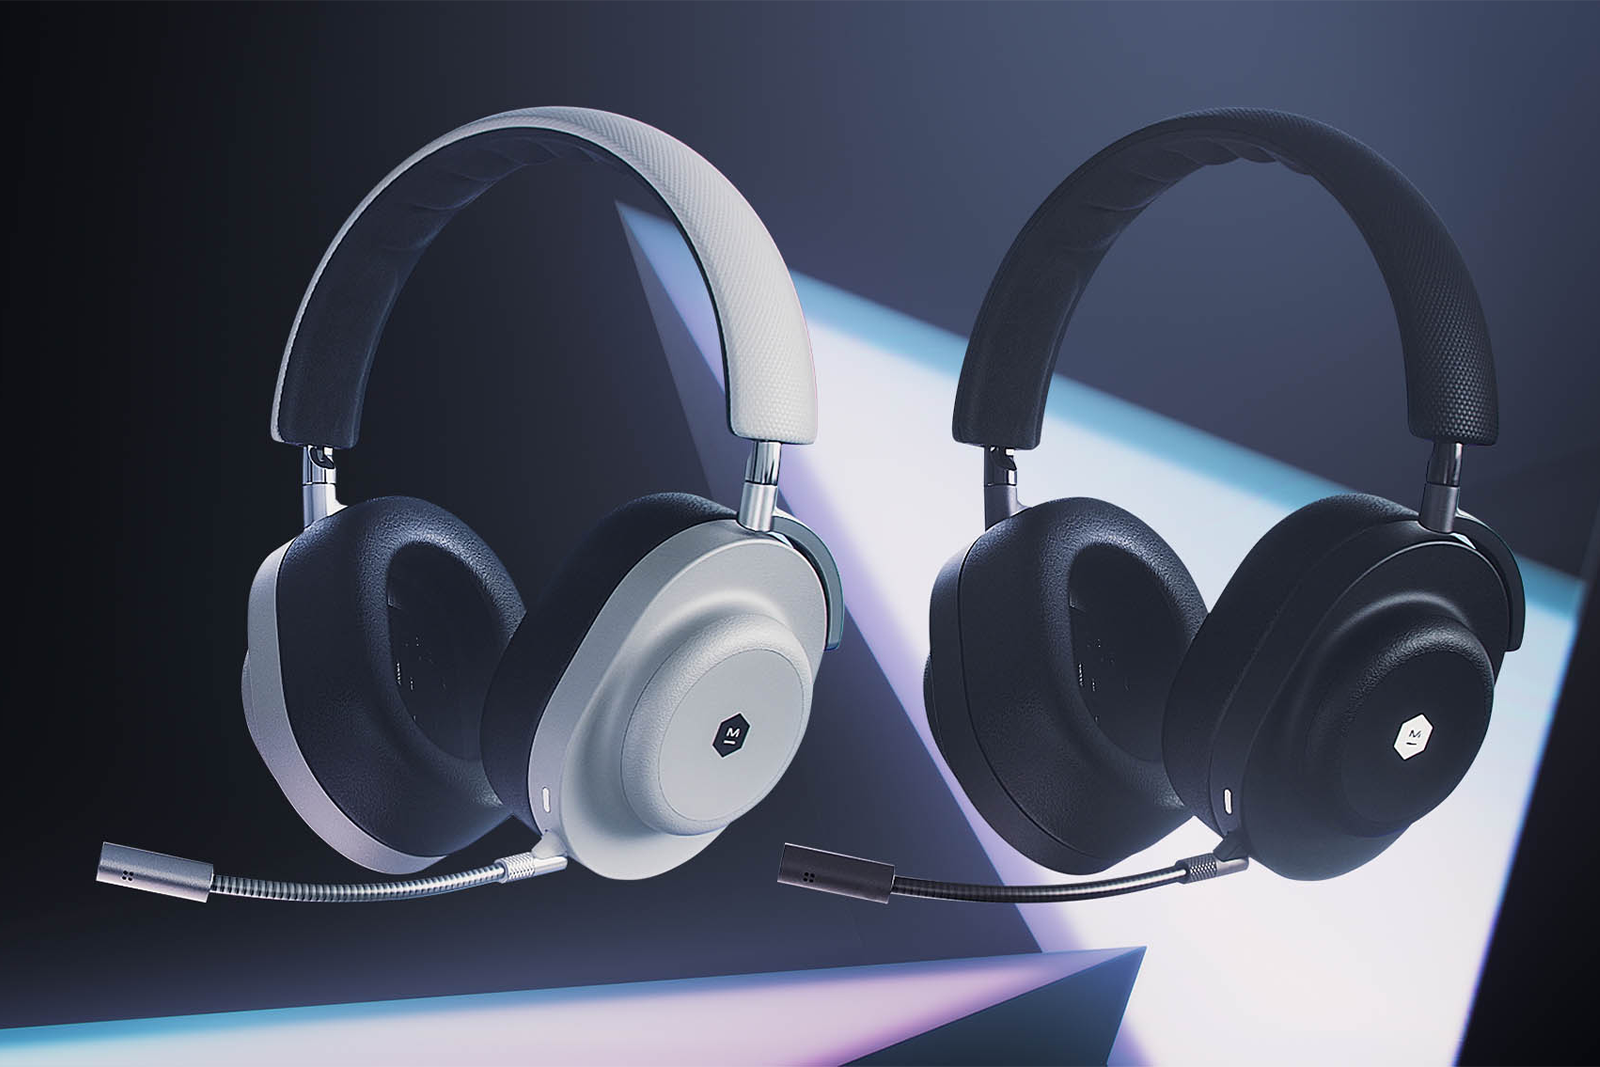 Master & Dynamic enters the gaming headset war with the MG20 photo 2